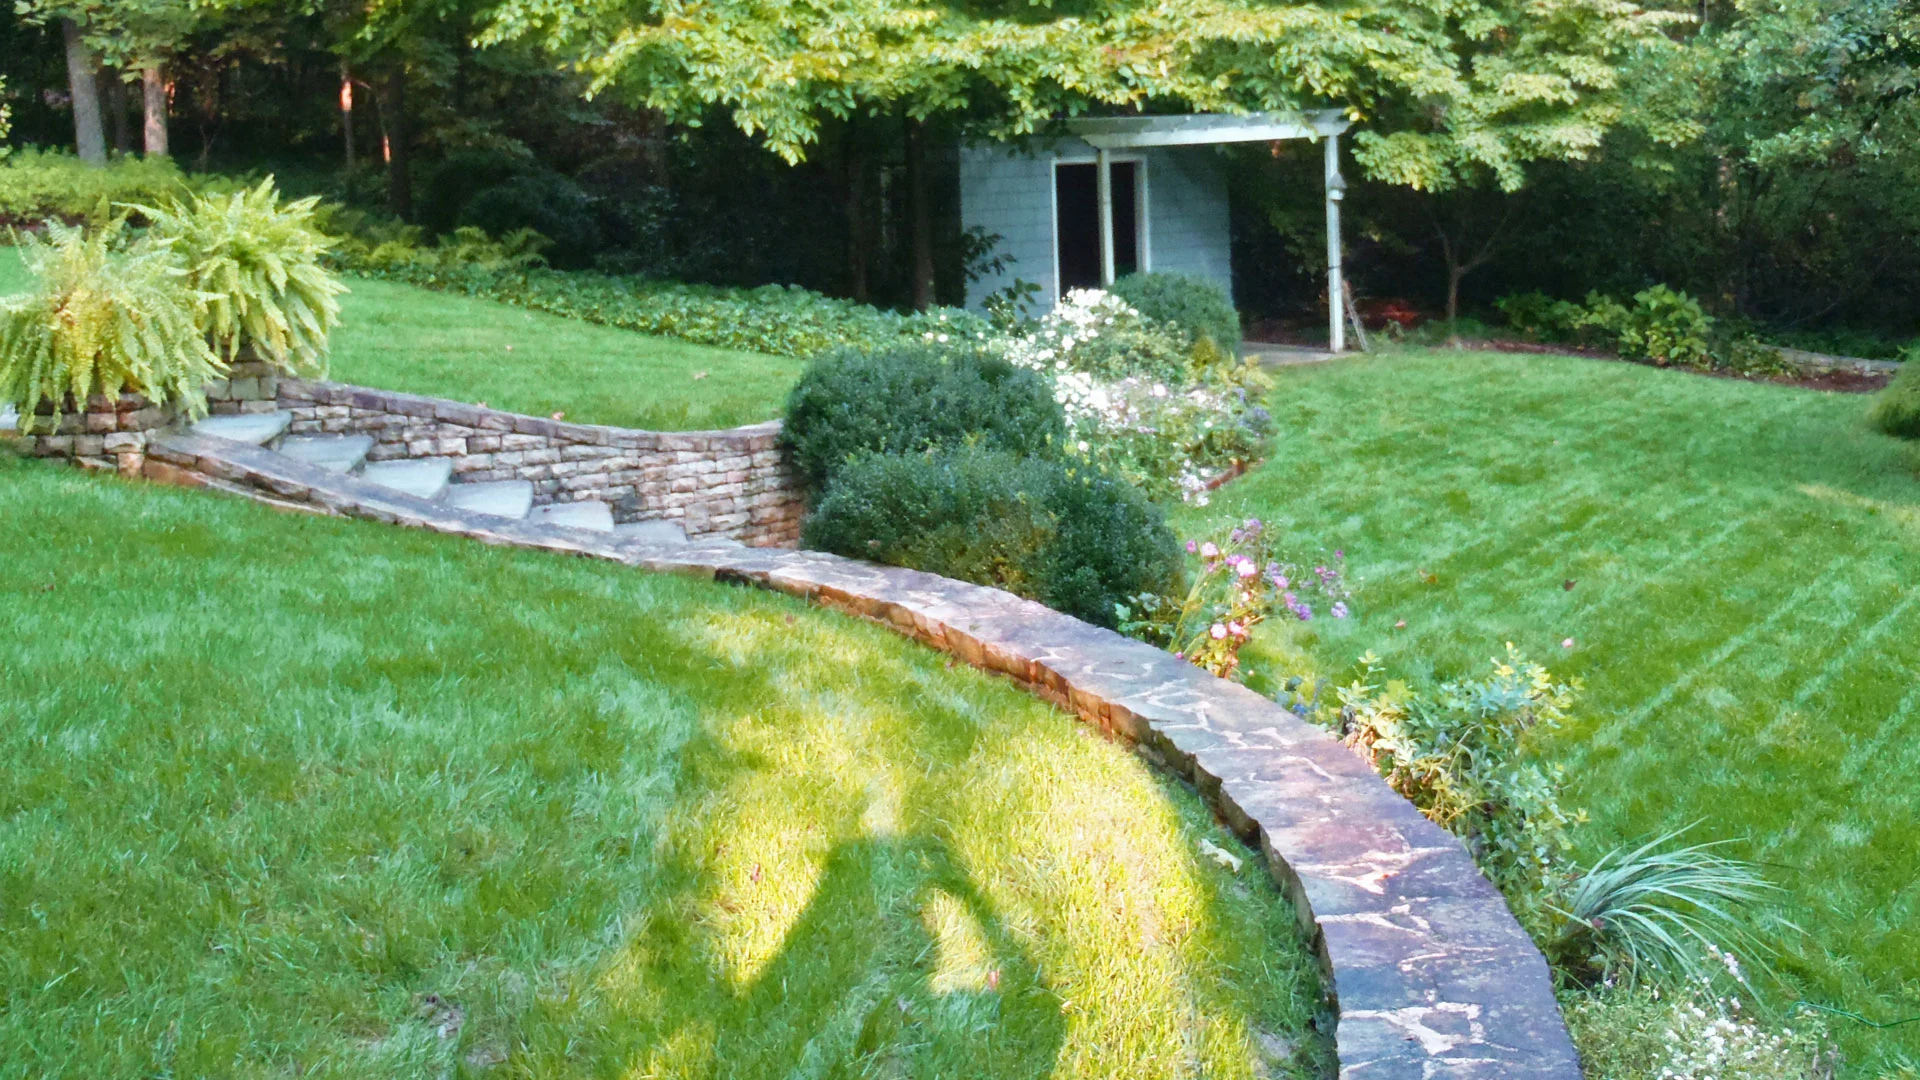 Backyard with hardscaping, steps, retaining wall, and mowed lawn.